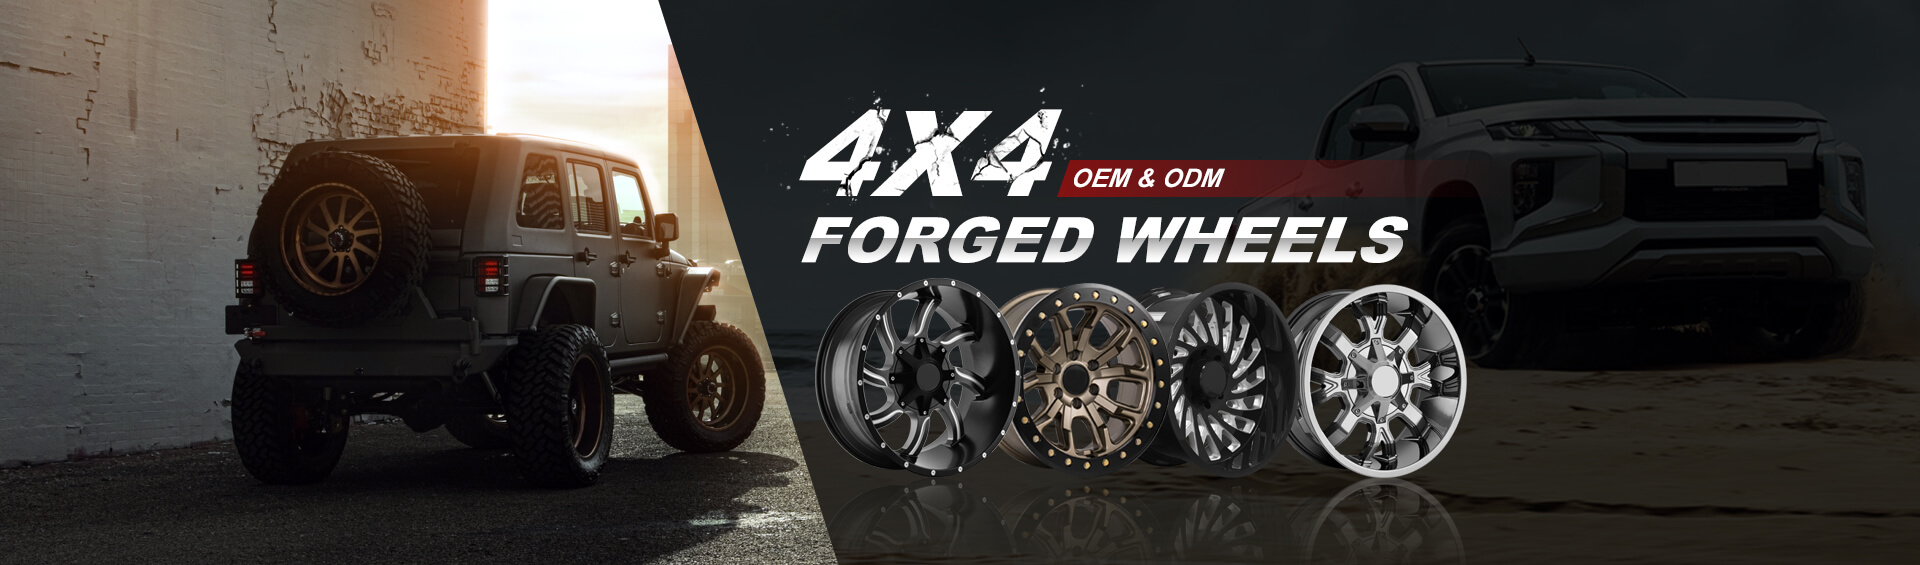 forged 4x4 offroad wheels